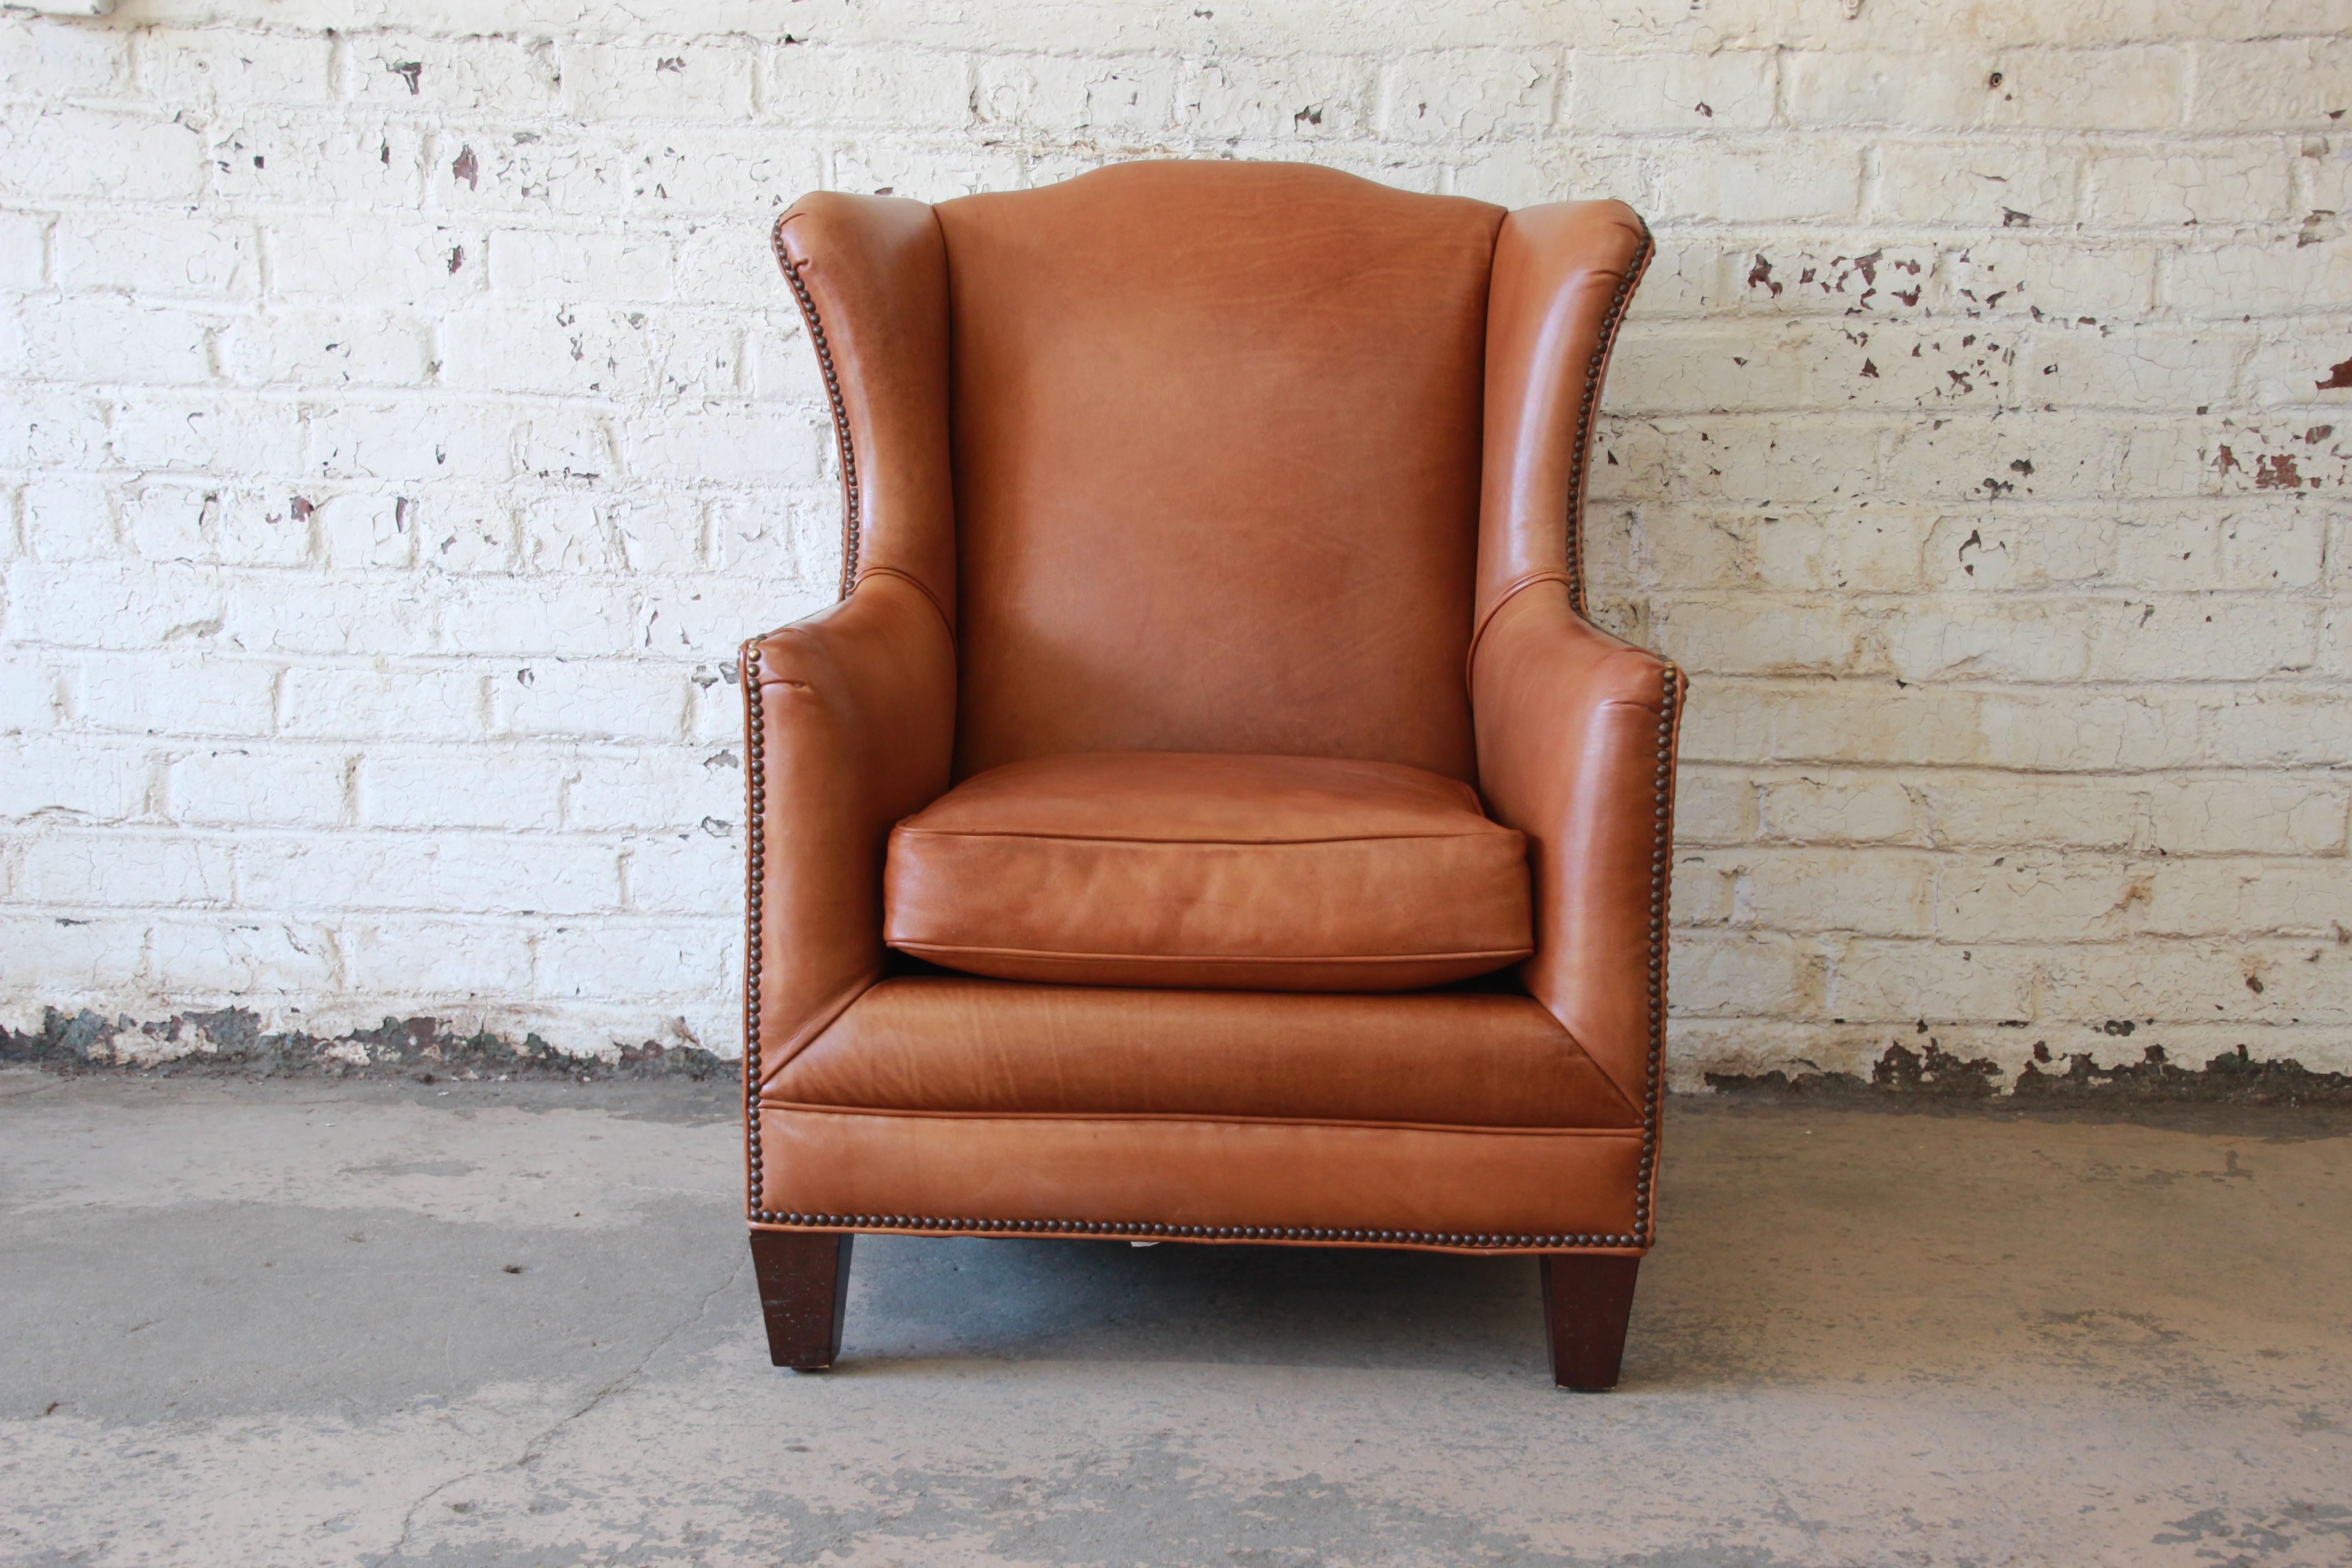 A very nice vintage studded brown leather wingback lounge chair by Henredon. The chair features gorgeous lightly age-worn brown leather. It is extremely comfortable and would fit nicely in both a traditional or modern environment. The chair is in